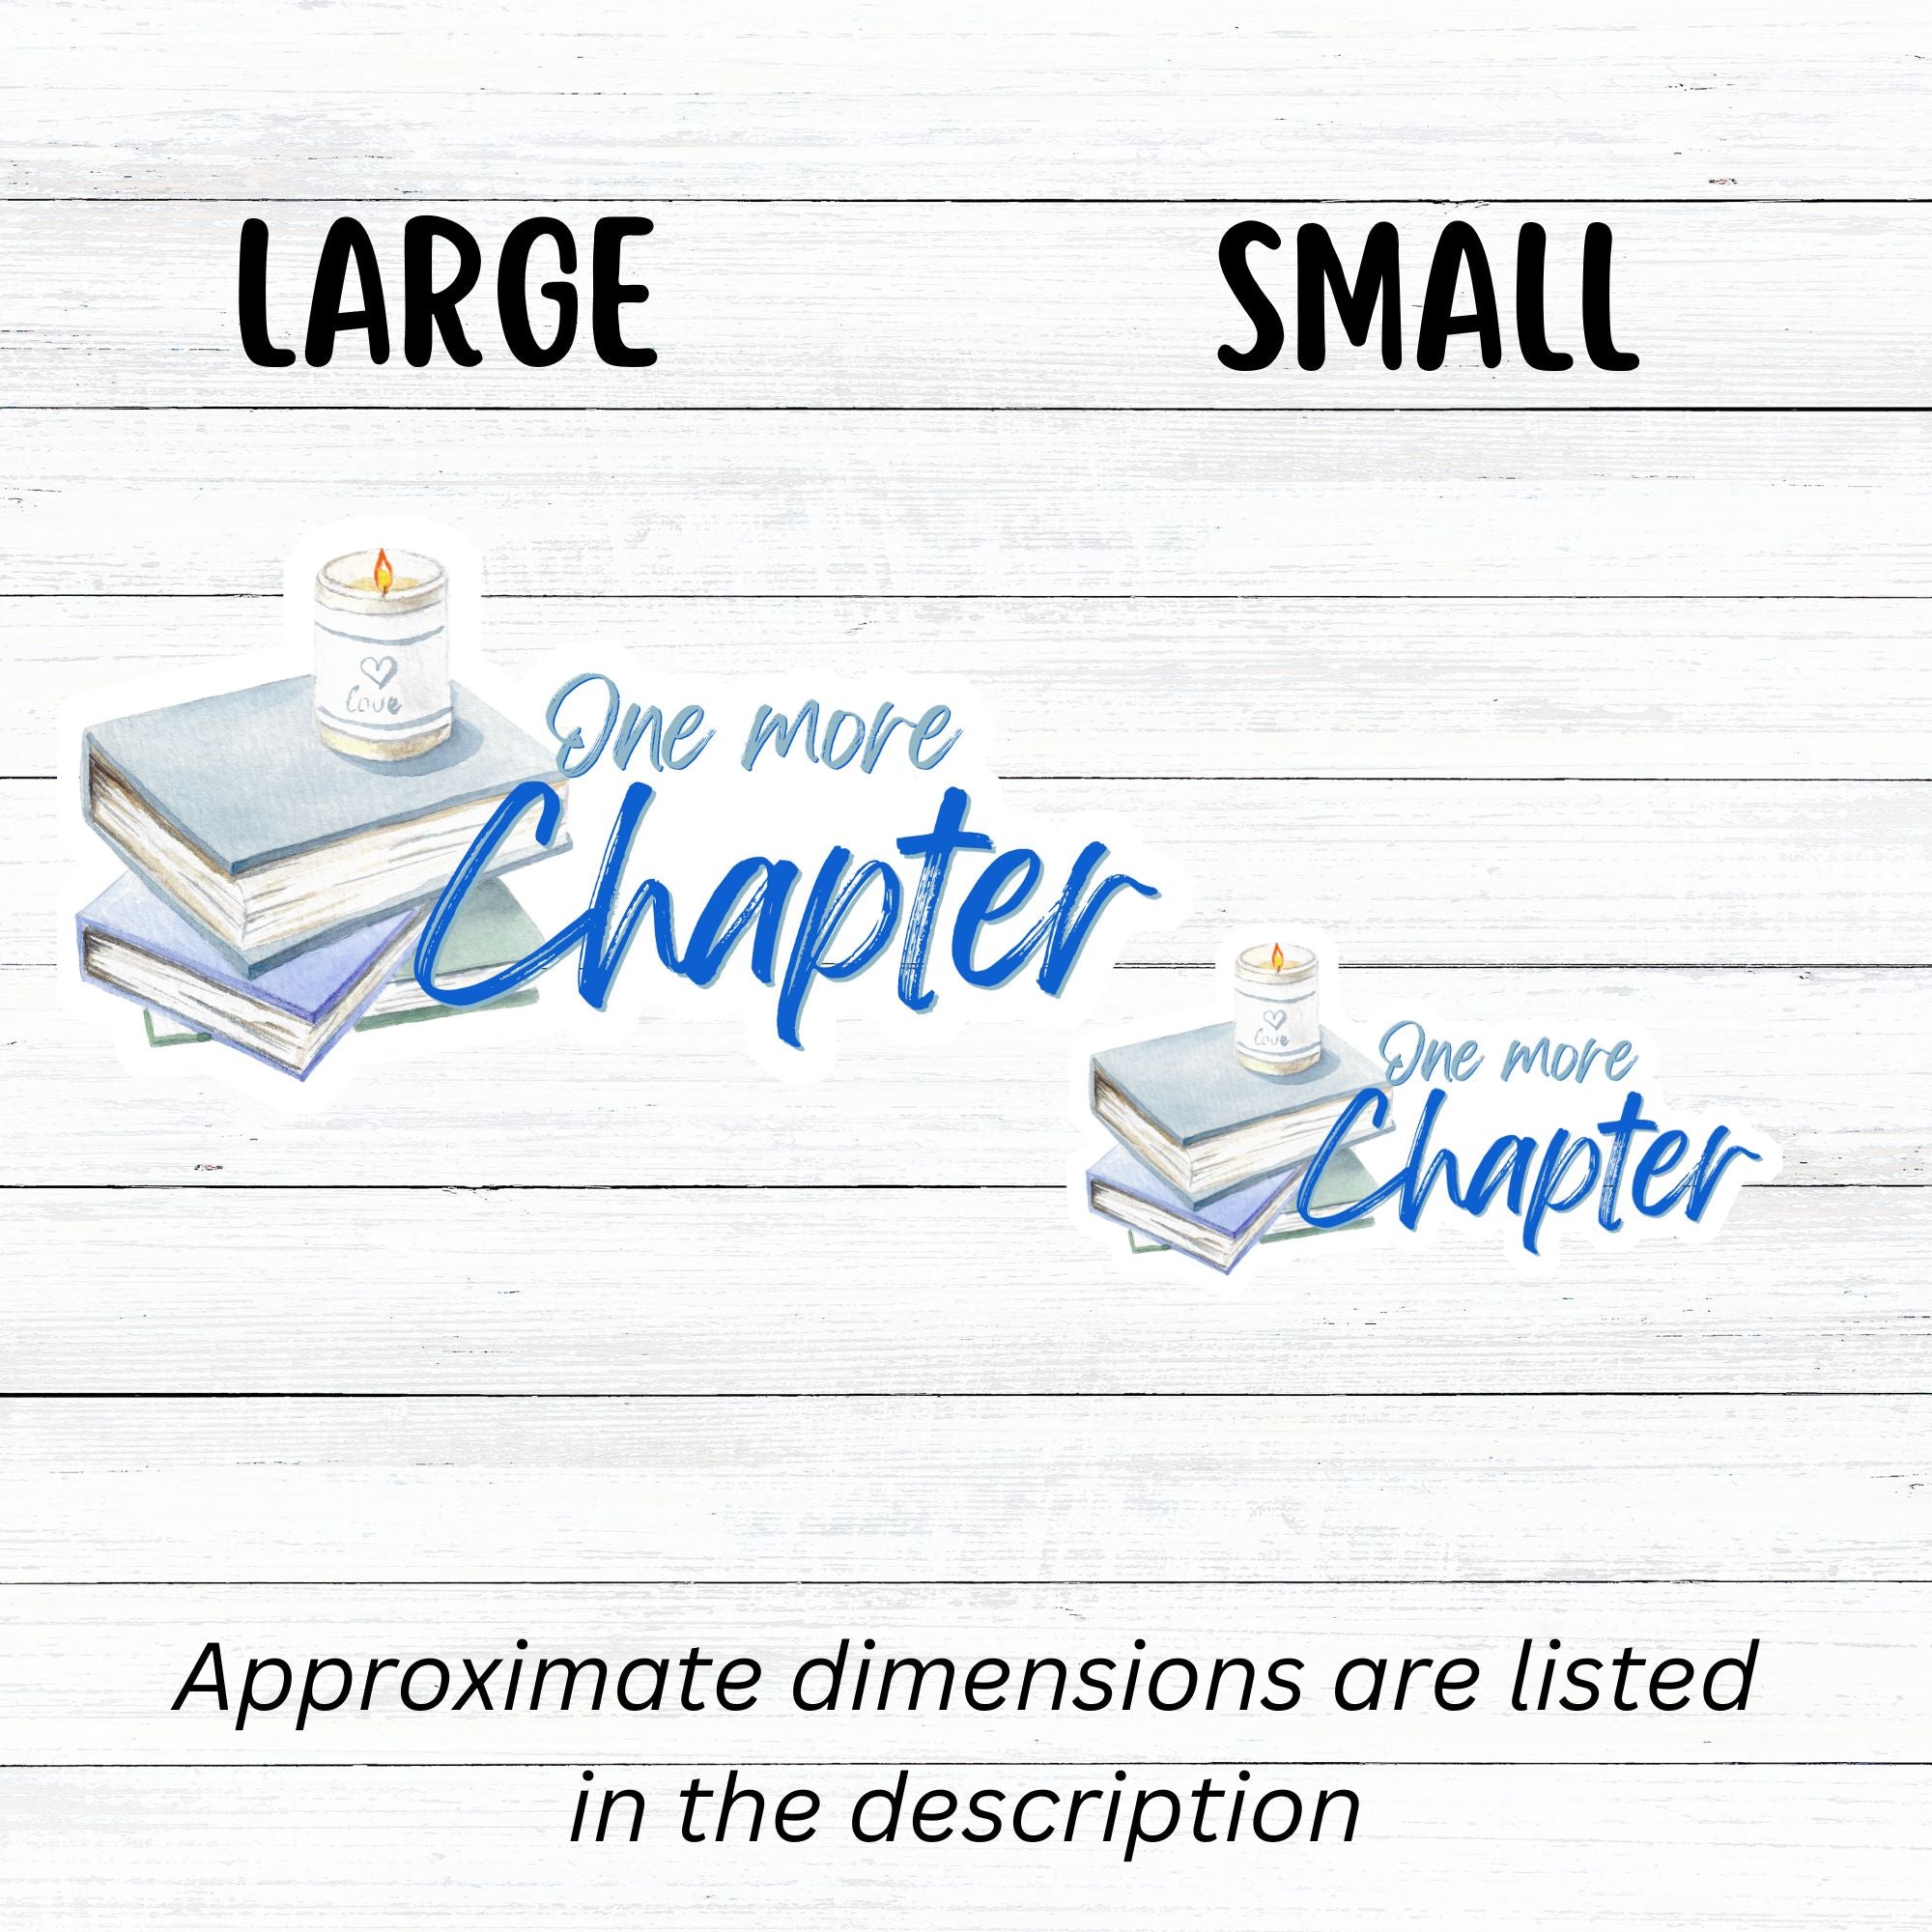 Love to read? If so then you know that there's always time for one more chapter! This individual die-cut sticker features a stack of books with a candle on top, and the words "One More Chapter", all in blue and gray on white. Enjoy your reading! This image shows large and small One More Chapter stickers next to each other.